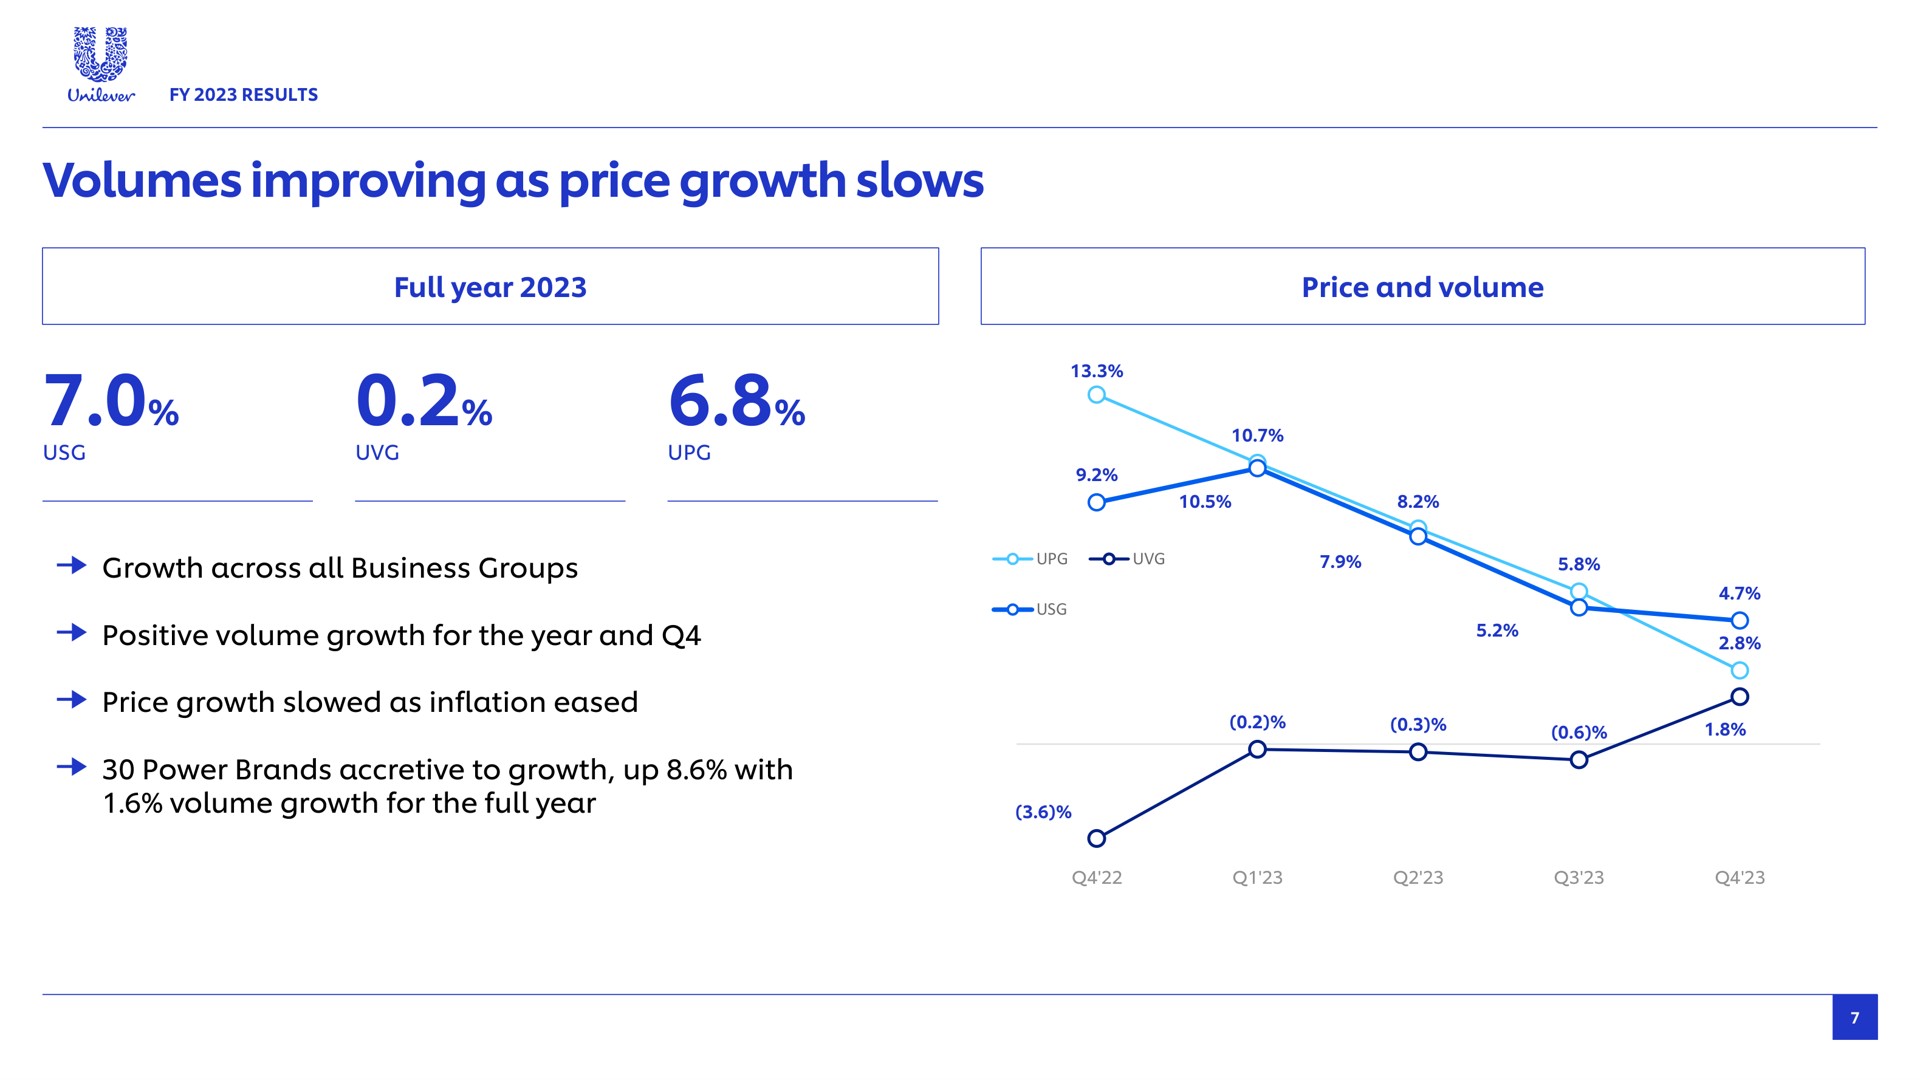 volumes improving as price growth slows aes wey full year and volume across all business groups positive volume for the year and slowed inflation eased power brands accretive to up with volume for the full year | Unilever